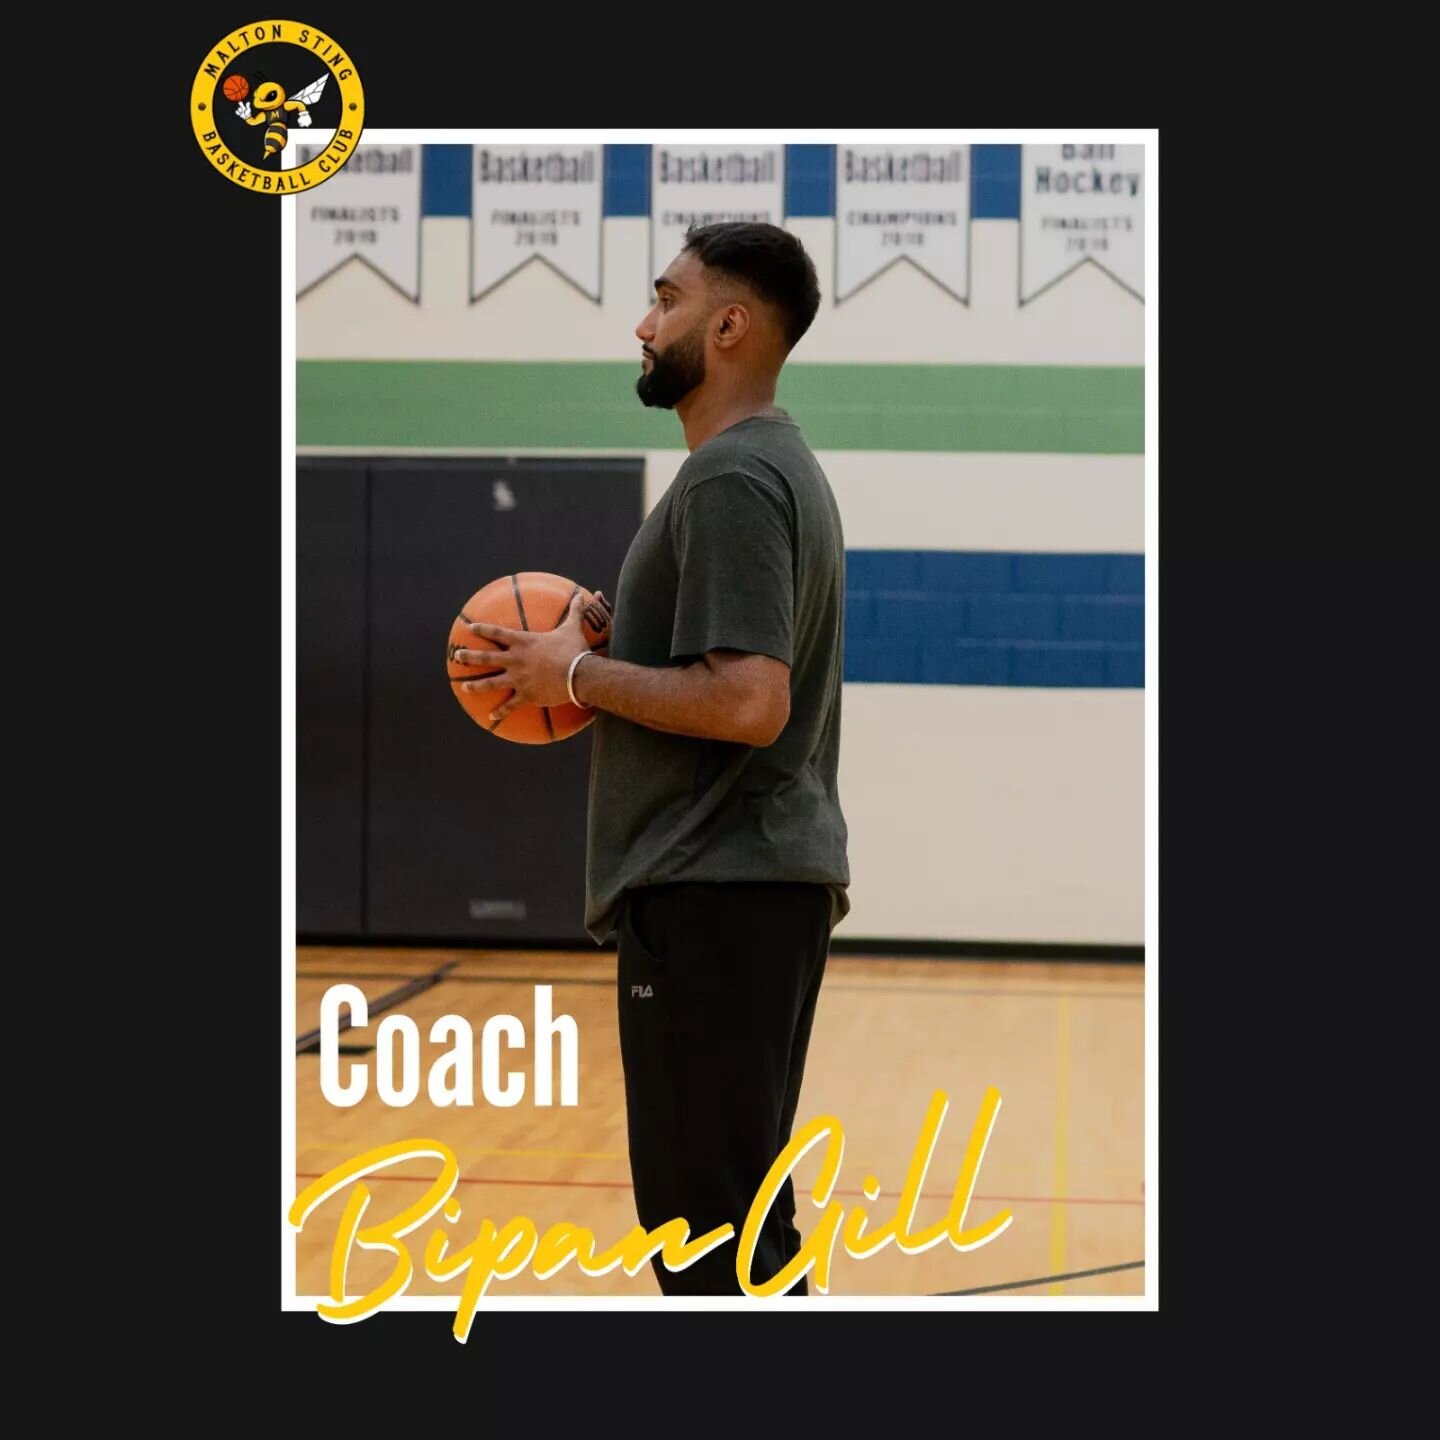 SEASON 5 - Coach 

🐝Coach Bipan began coaching the Sting Jr. NBA program in 2023. He has an immense passion and appreciation for the game and is excited to begin his coaching career. As a Jr. NBA coach, Coach Bipan really enjoys the grassroots devel